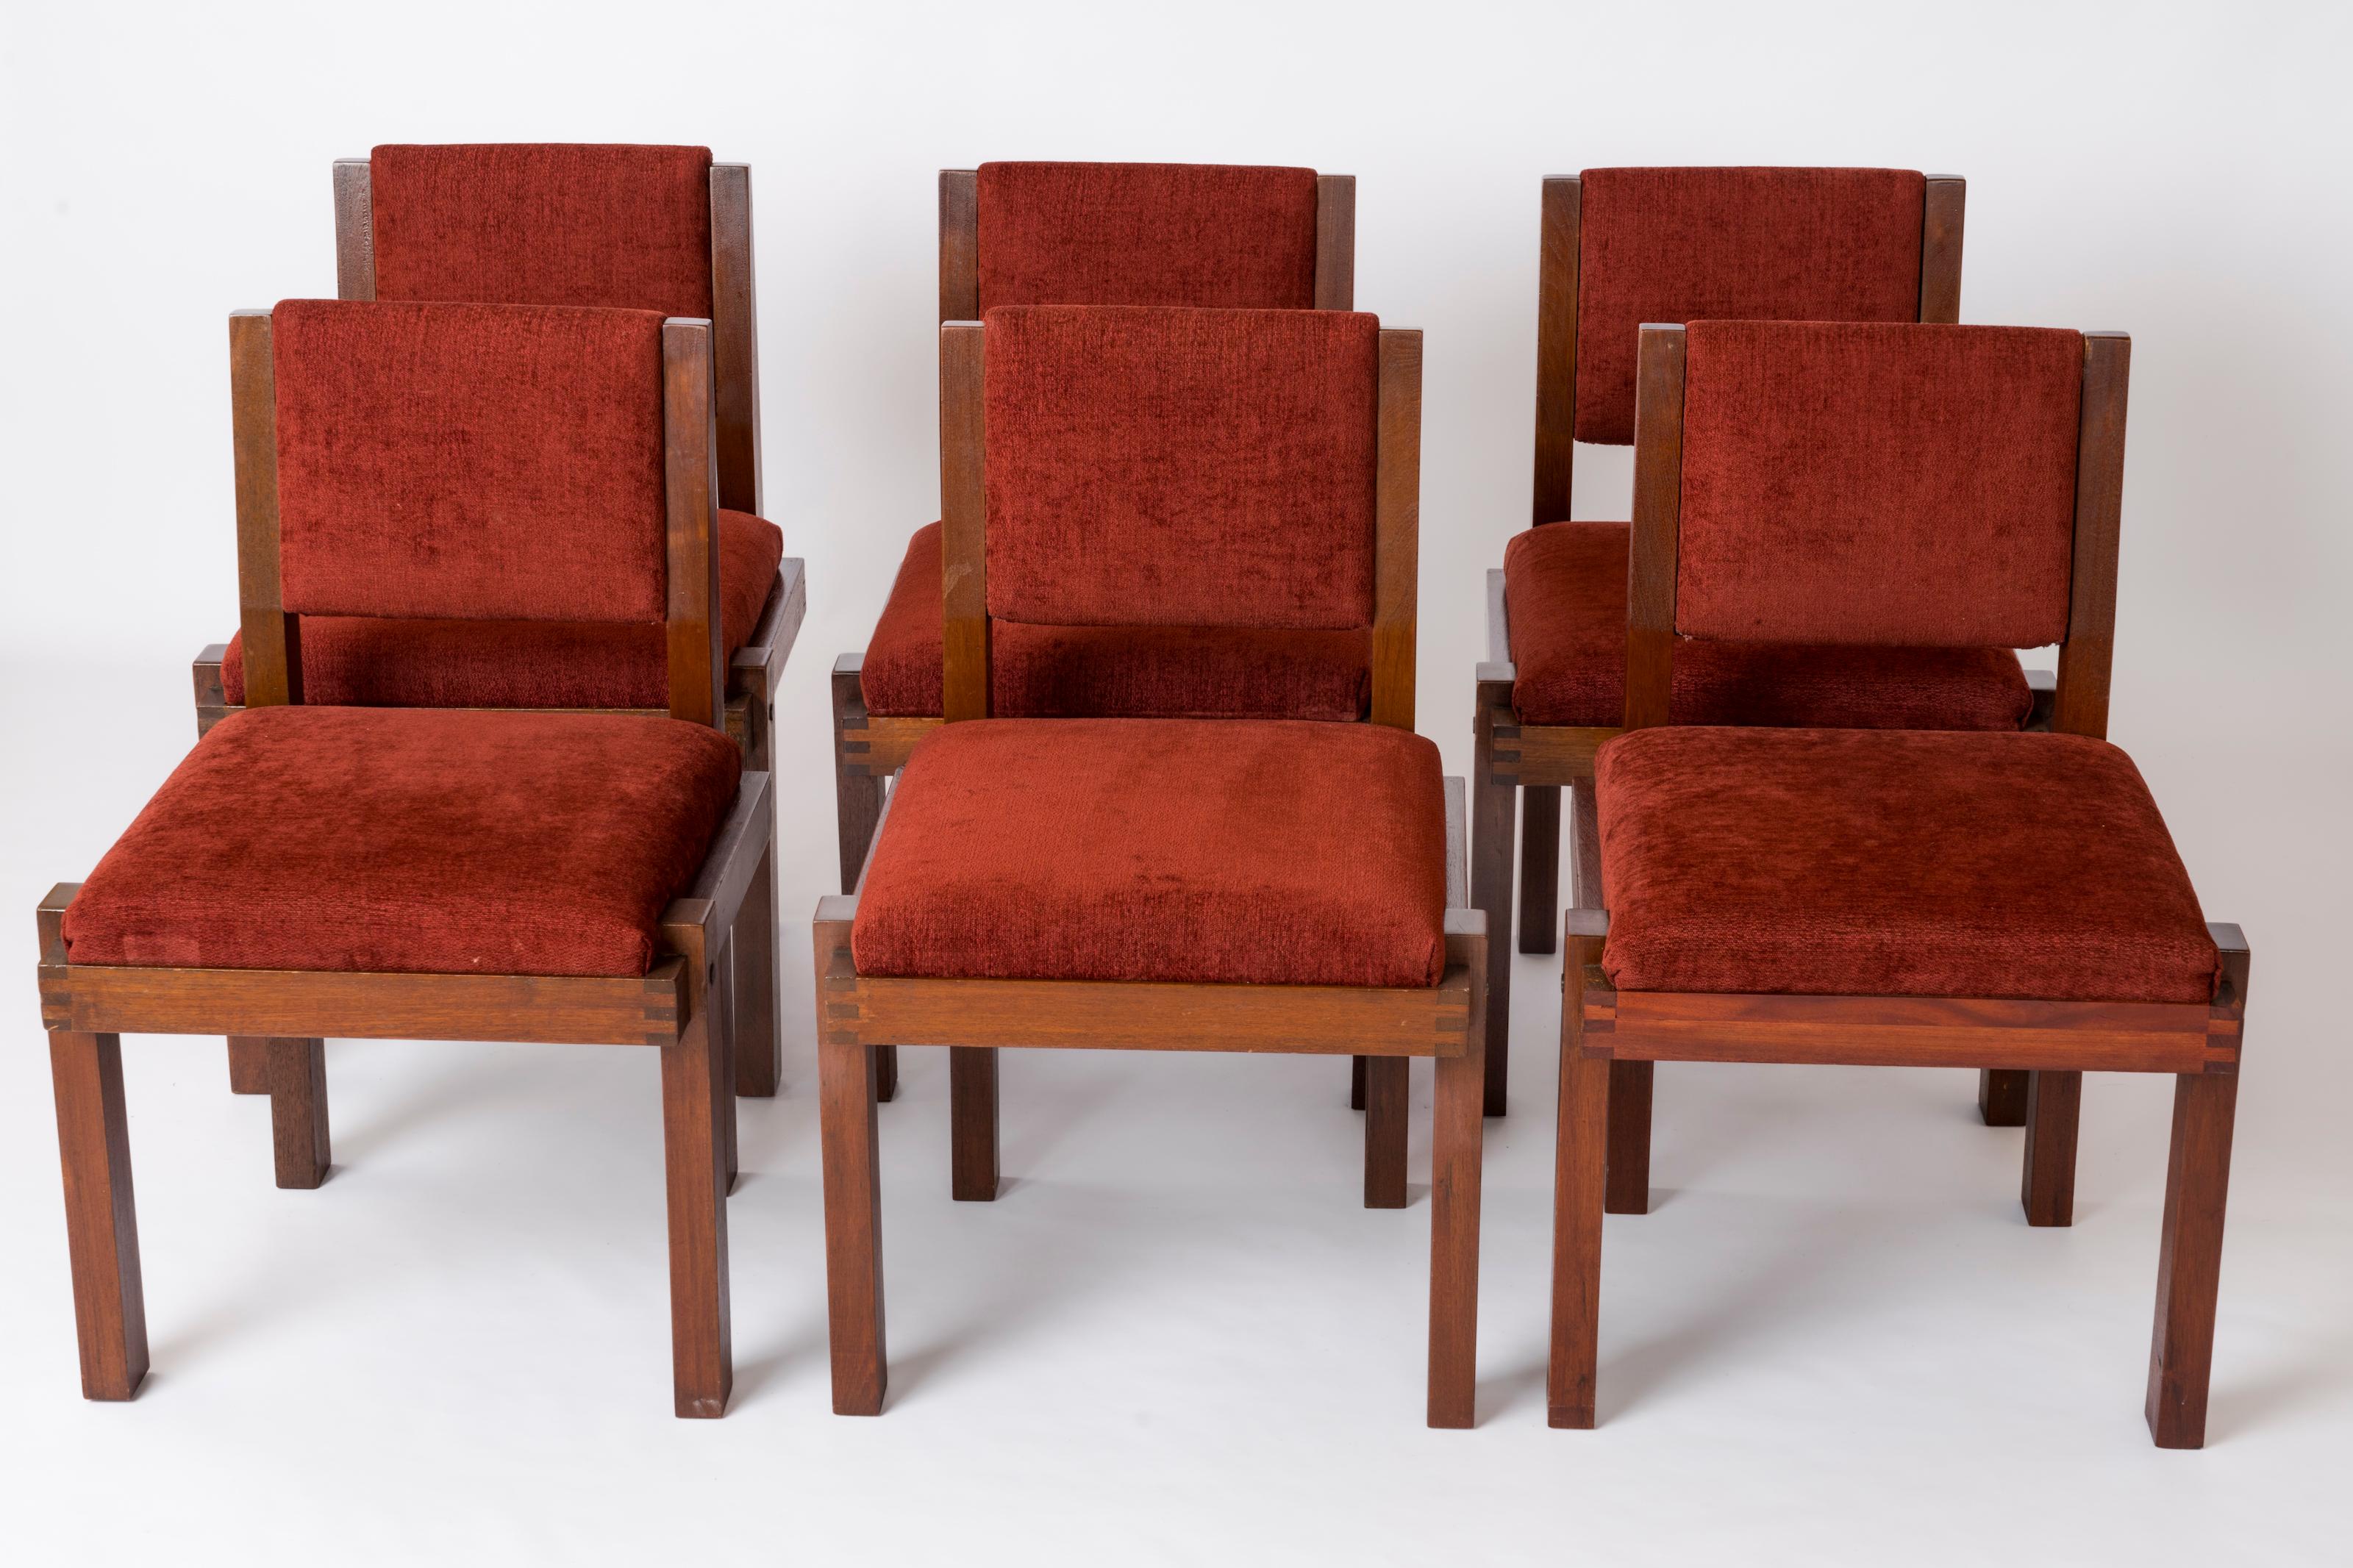 A set of six architect modernist chairs in the Bauhaus style. These chairs are made of solid mahogany with 